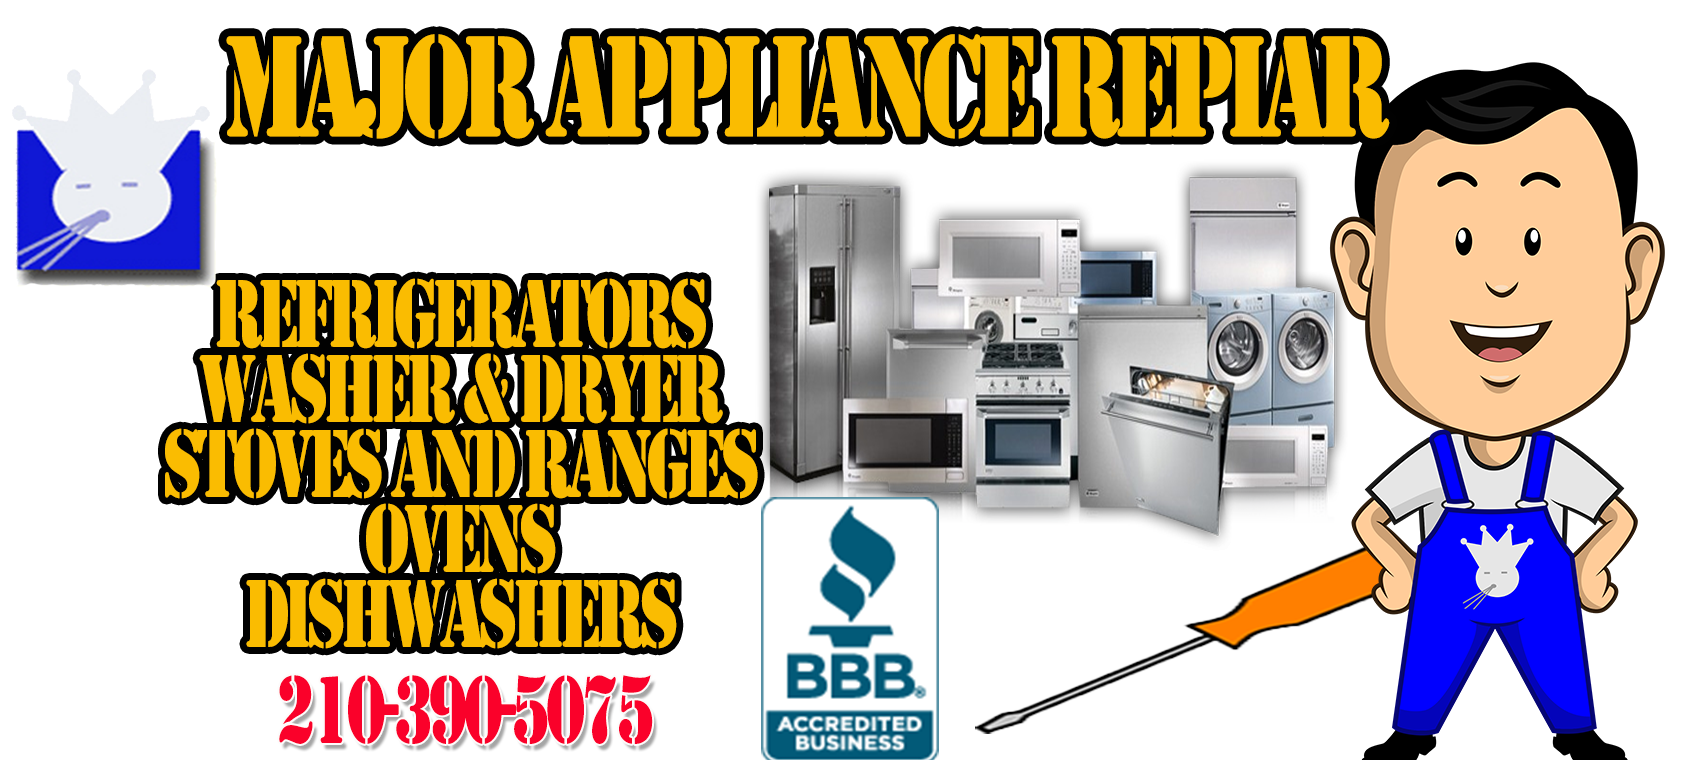  if you are having issues with a dishwasher that doesn't drain or a refrigerator that is not keeping your food cold San Antonio. Contact AAA Duct Cleaning to schedule your appliance repair today.  our appliance repair division San Antonio repairs dryers that are not heating properly and washers that do not feel adequately with water